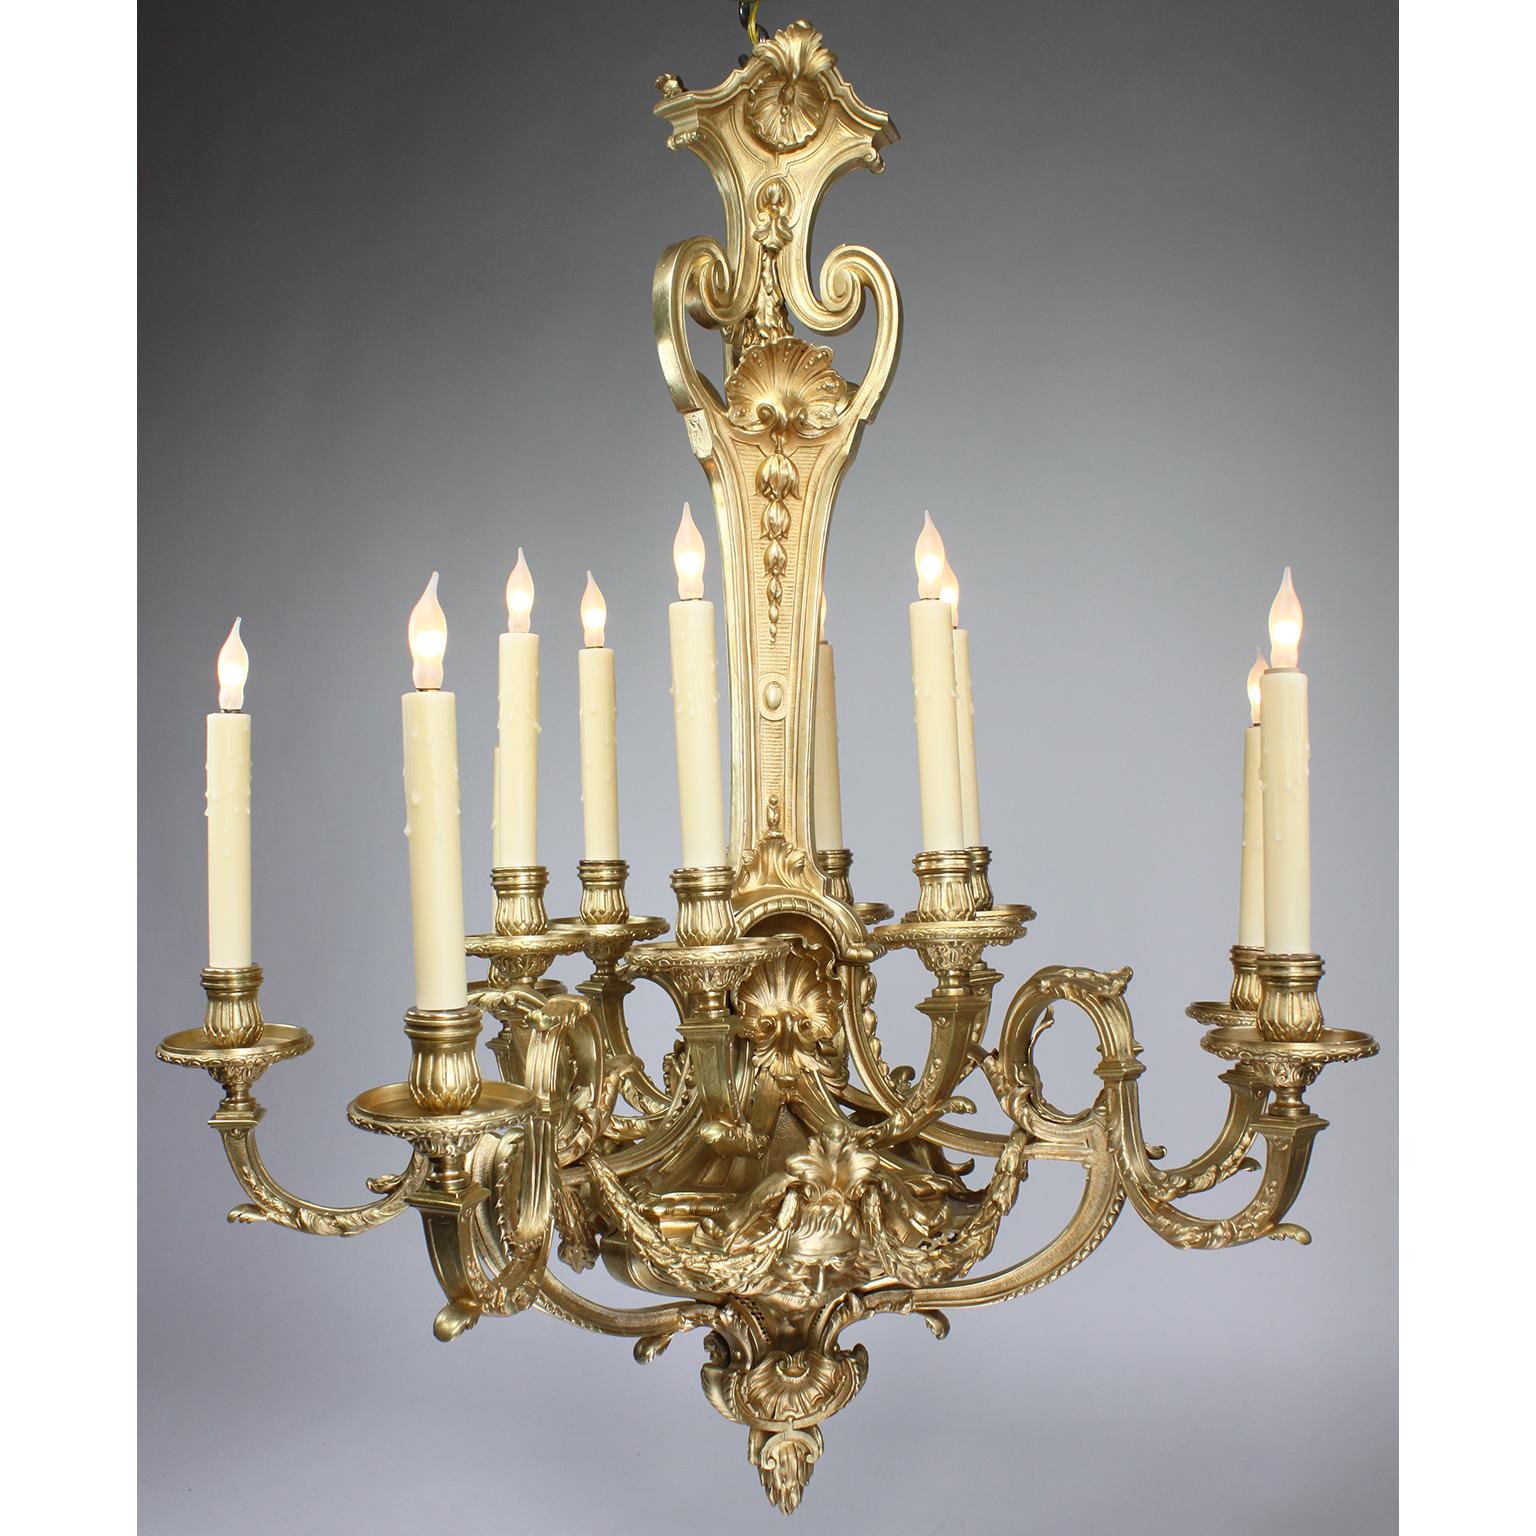 A Fine French Regency Revival Style Belle-Époque (Régence Style) Gilt-Bronze Twelve-Light Figural Chandelier. The ornate ovoid body suspended from a central stem decorated with seashells and flowers, surmounted with twelve scrolled candle-arms with